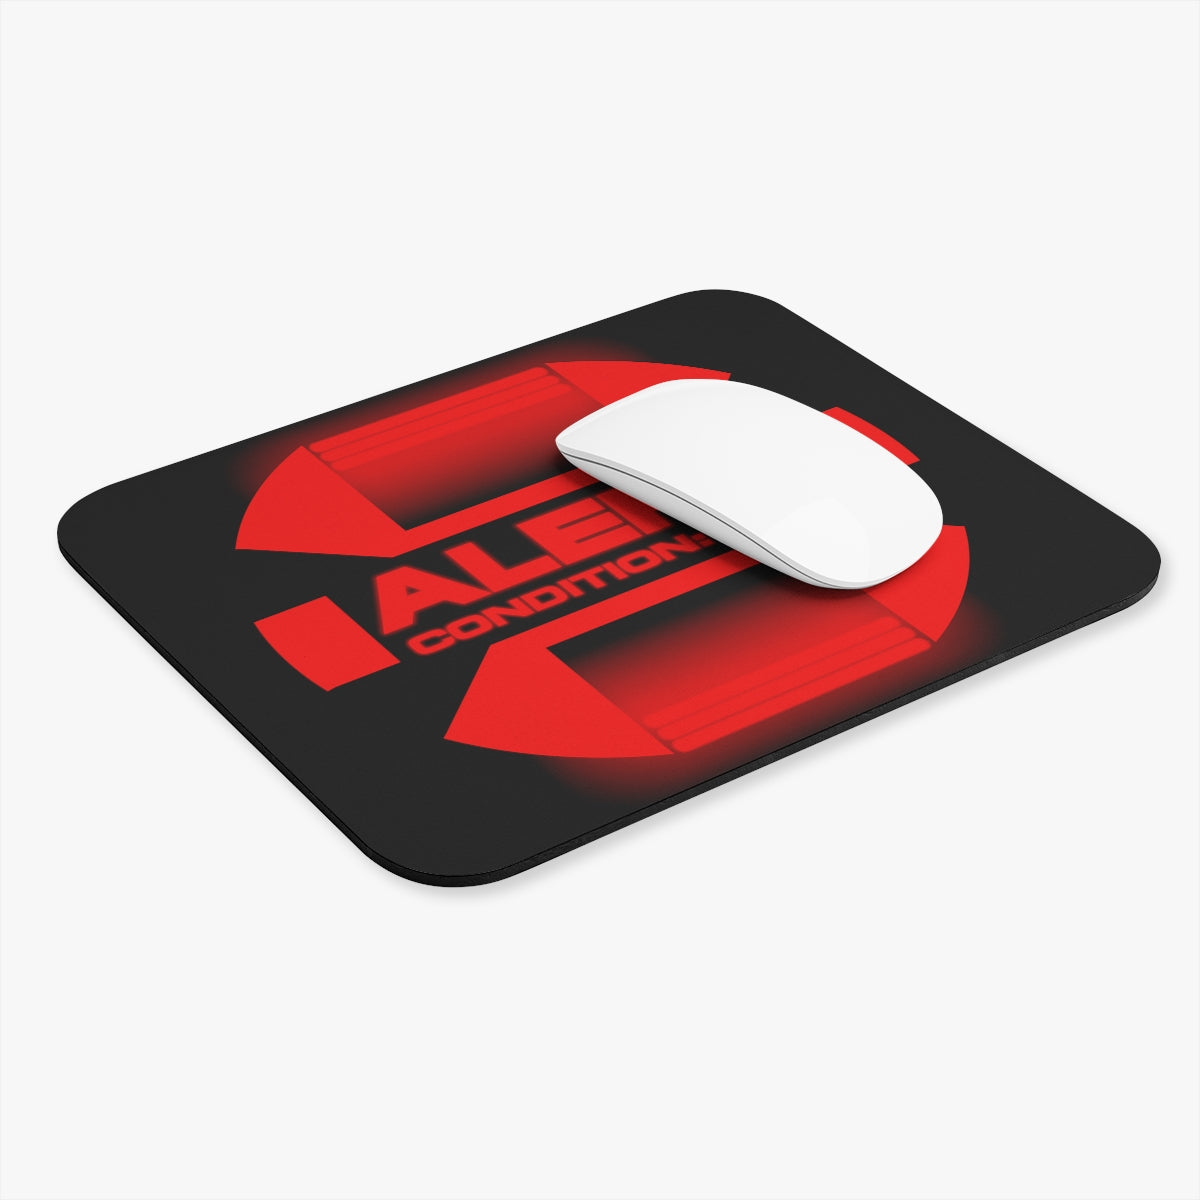 Red Alert TWOK LCARS Mouse Pad